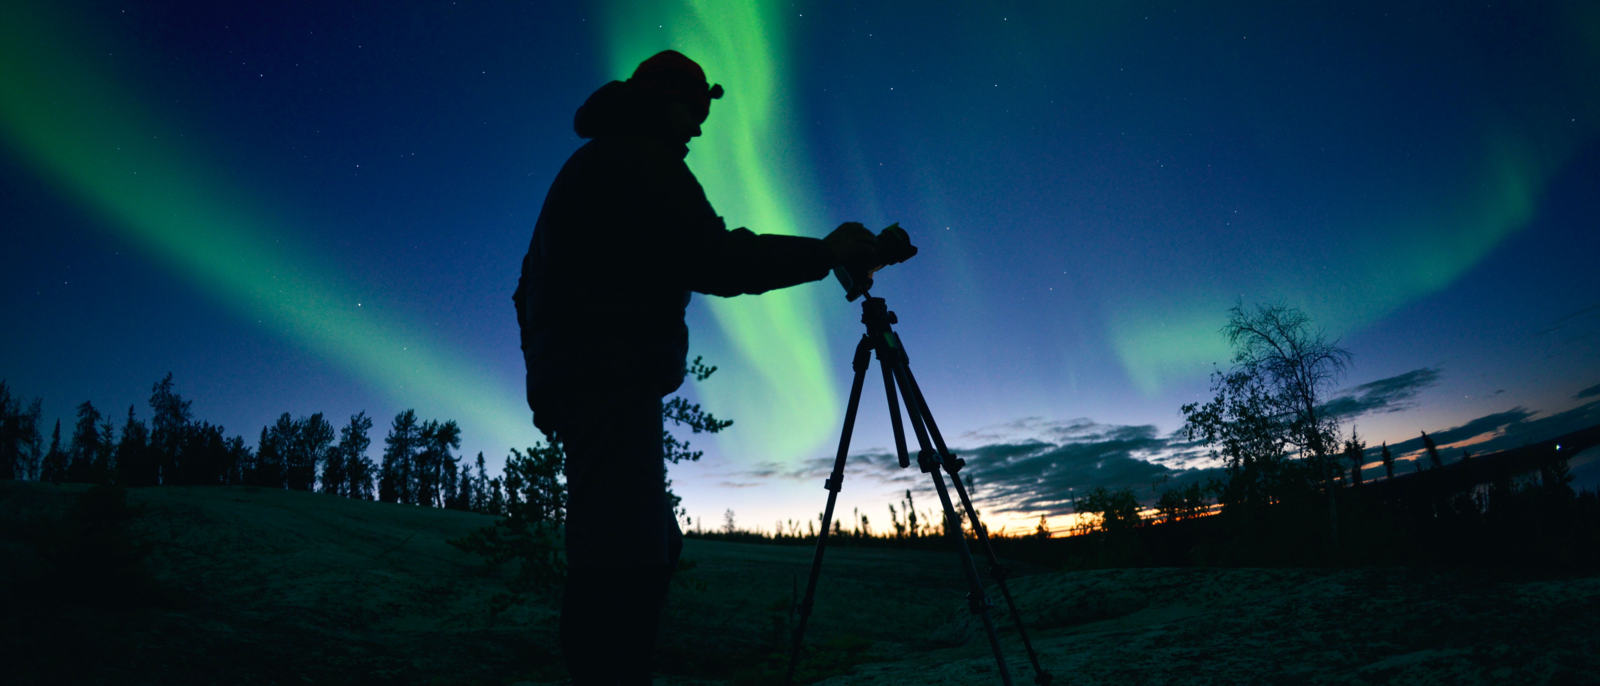 A photographer captures the most stunning display of Northern Lights in Canada.